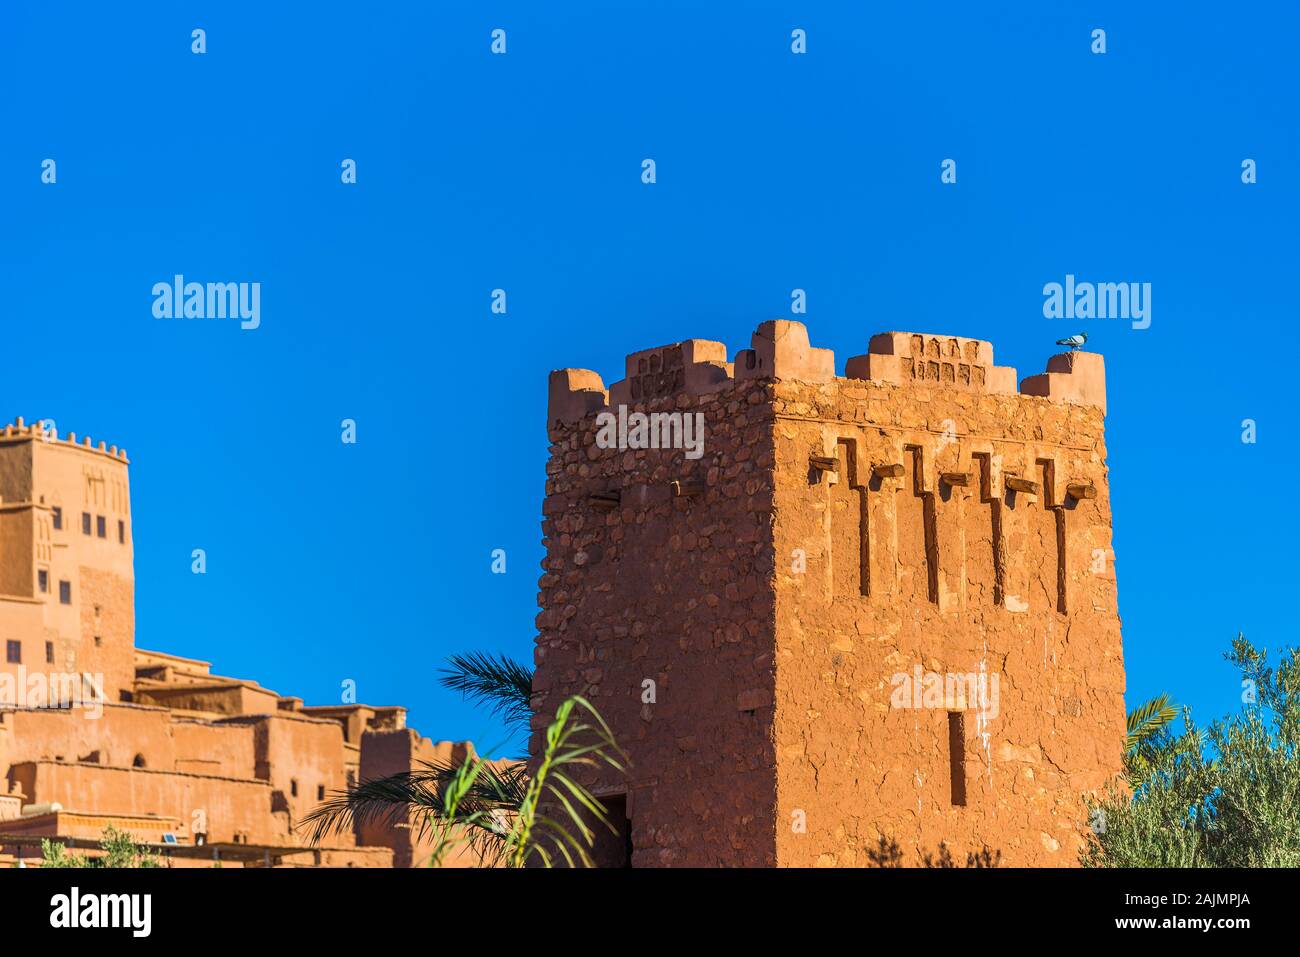 View of the facade of a building in Ait-Ben-Haddou, Morocco Stock Photo